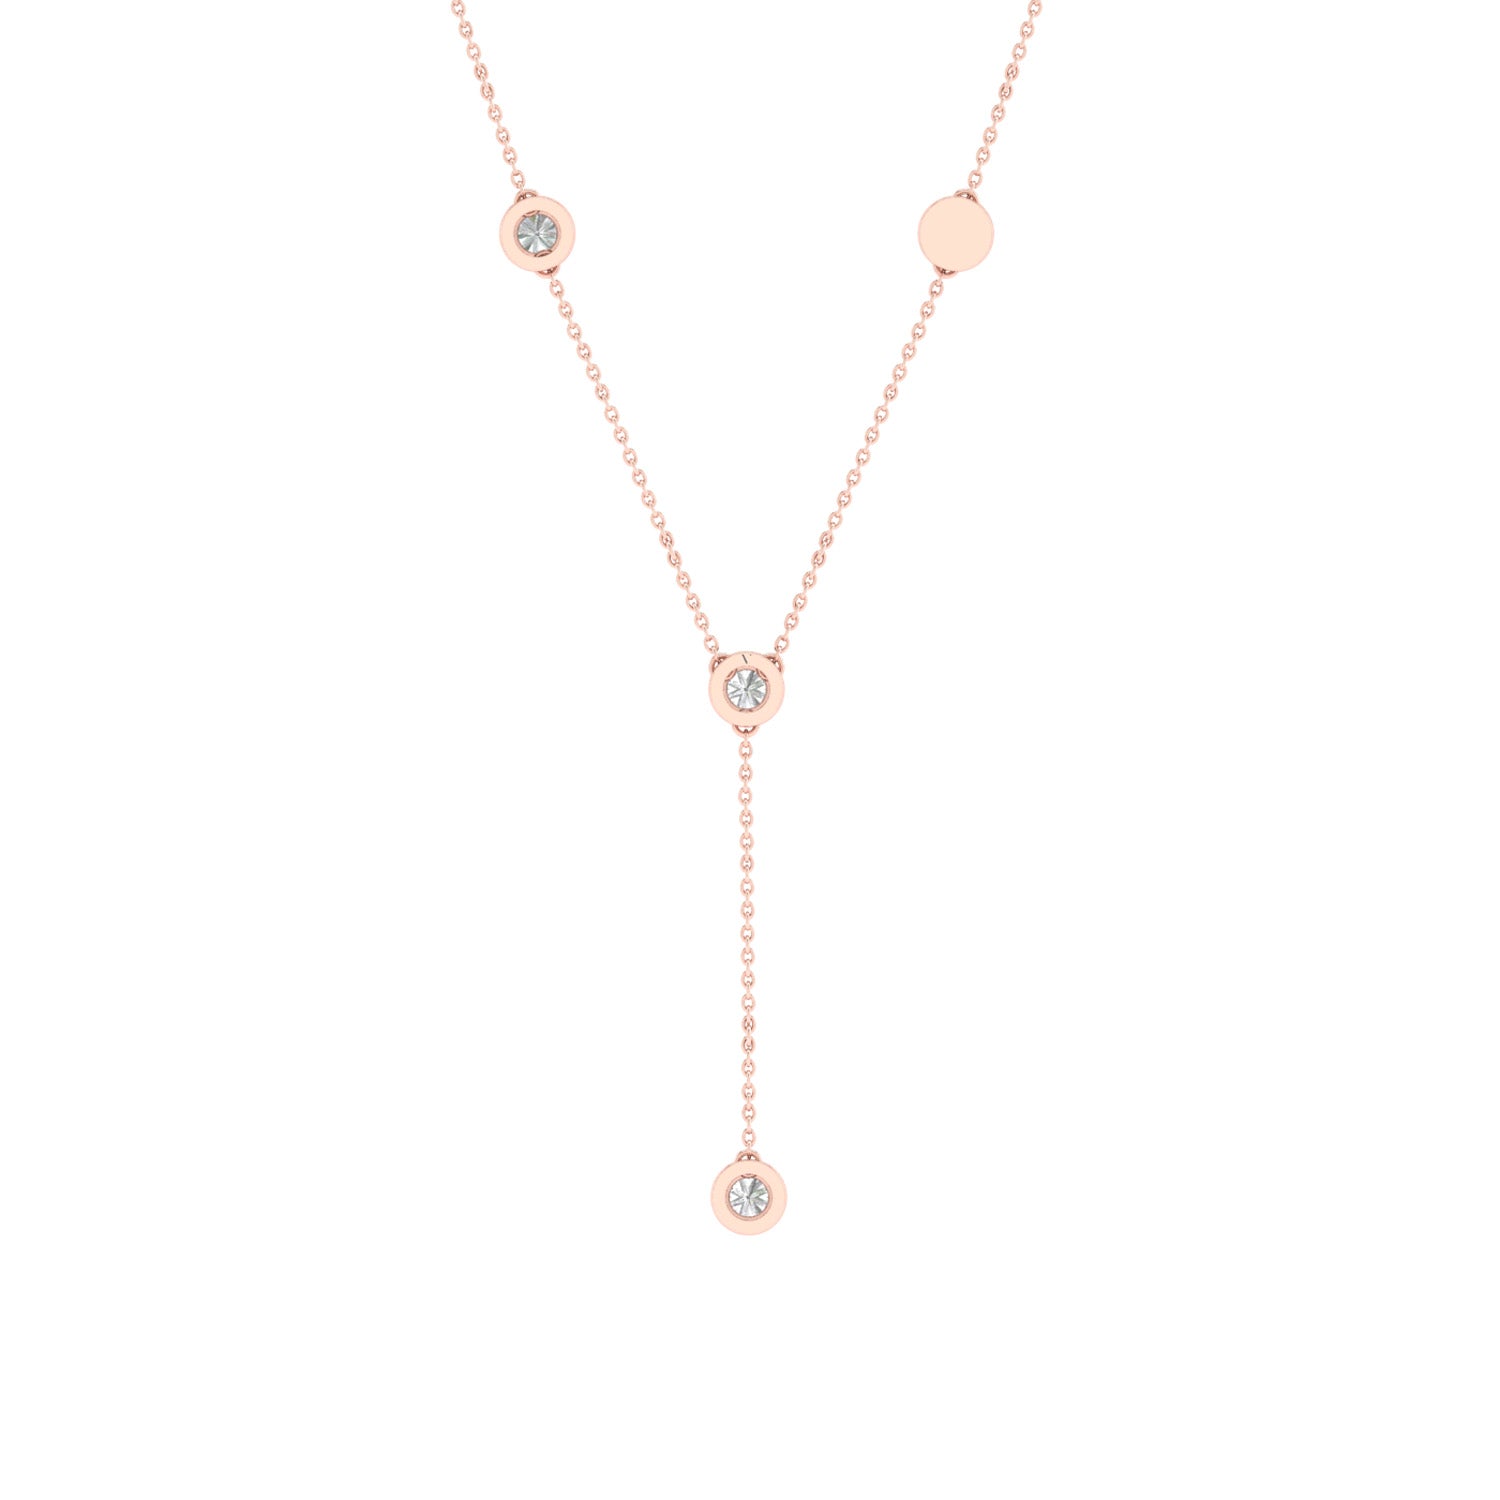 Encompassing Round Stationed Y Necklace_Product angle_1/4 Ct. - 3